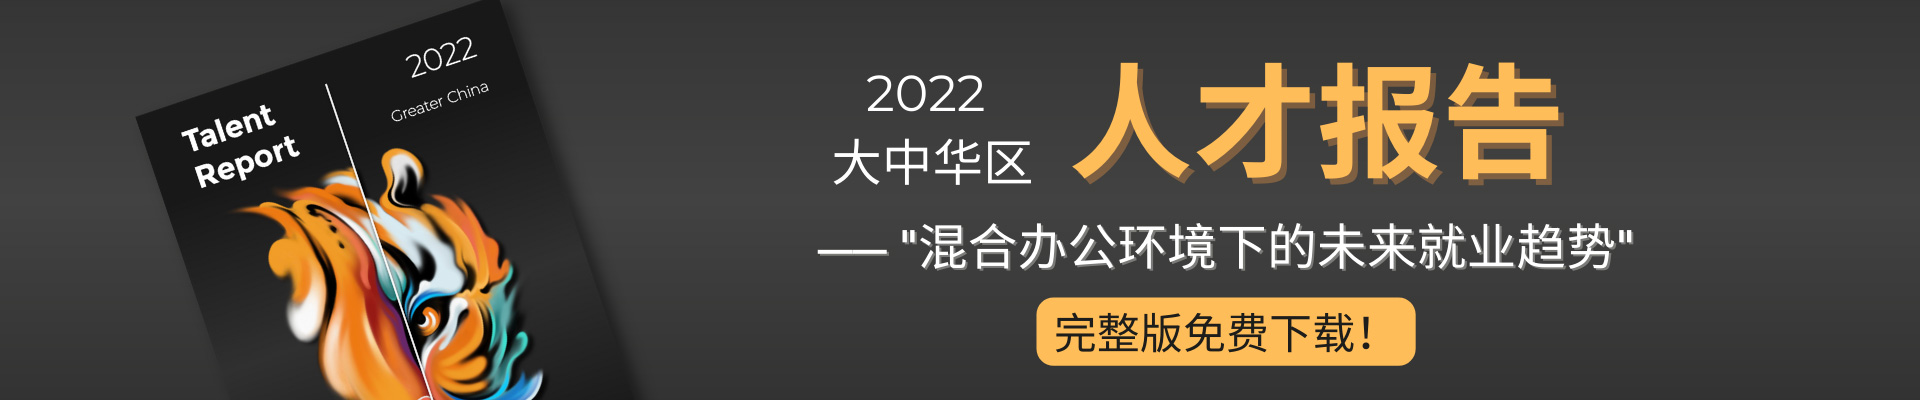 Talent Rerort Greater China 2022